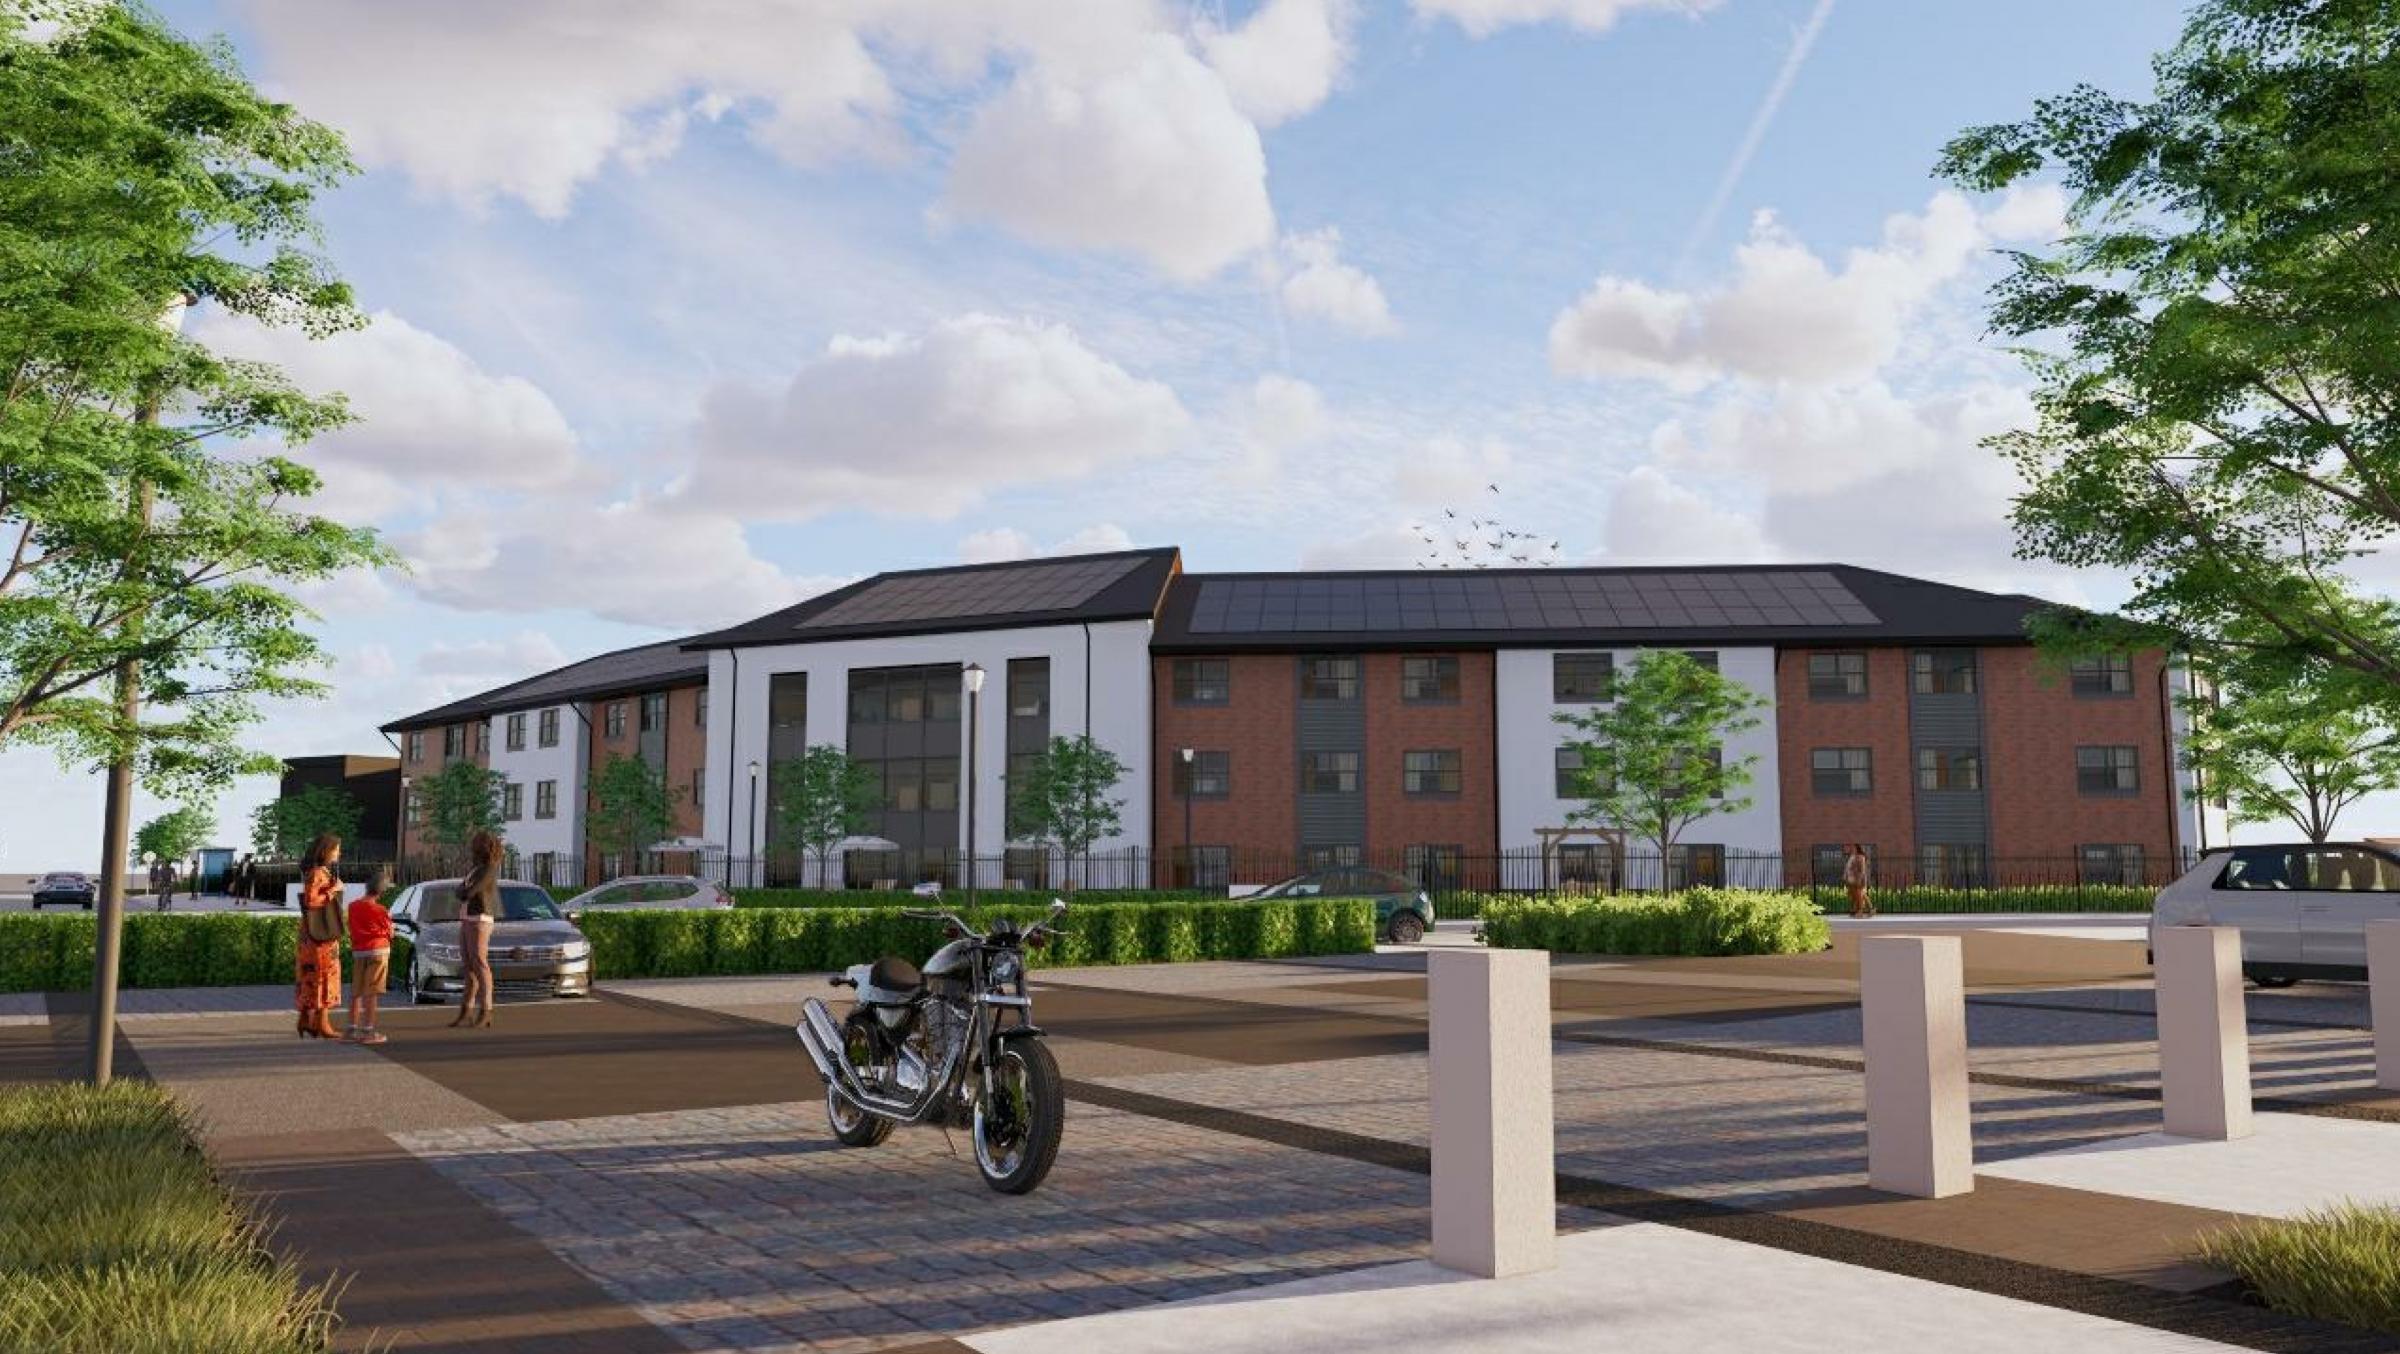 New care home planned in Spennymoor near Durham